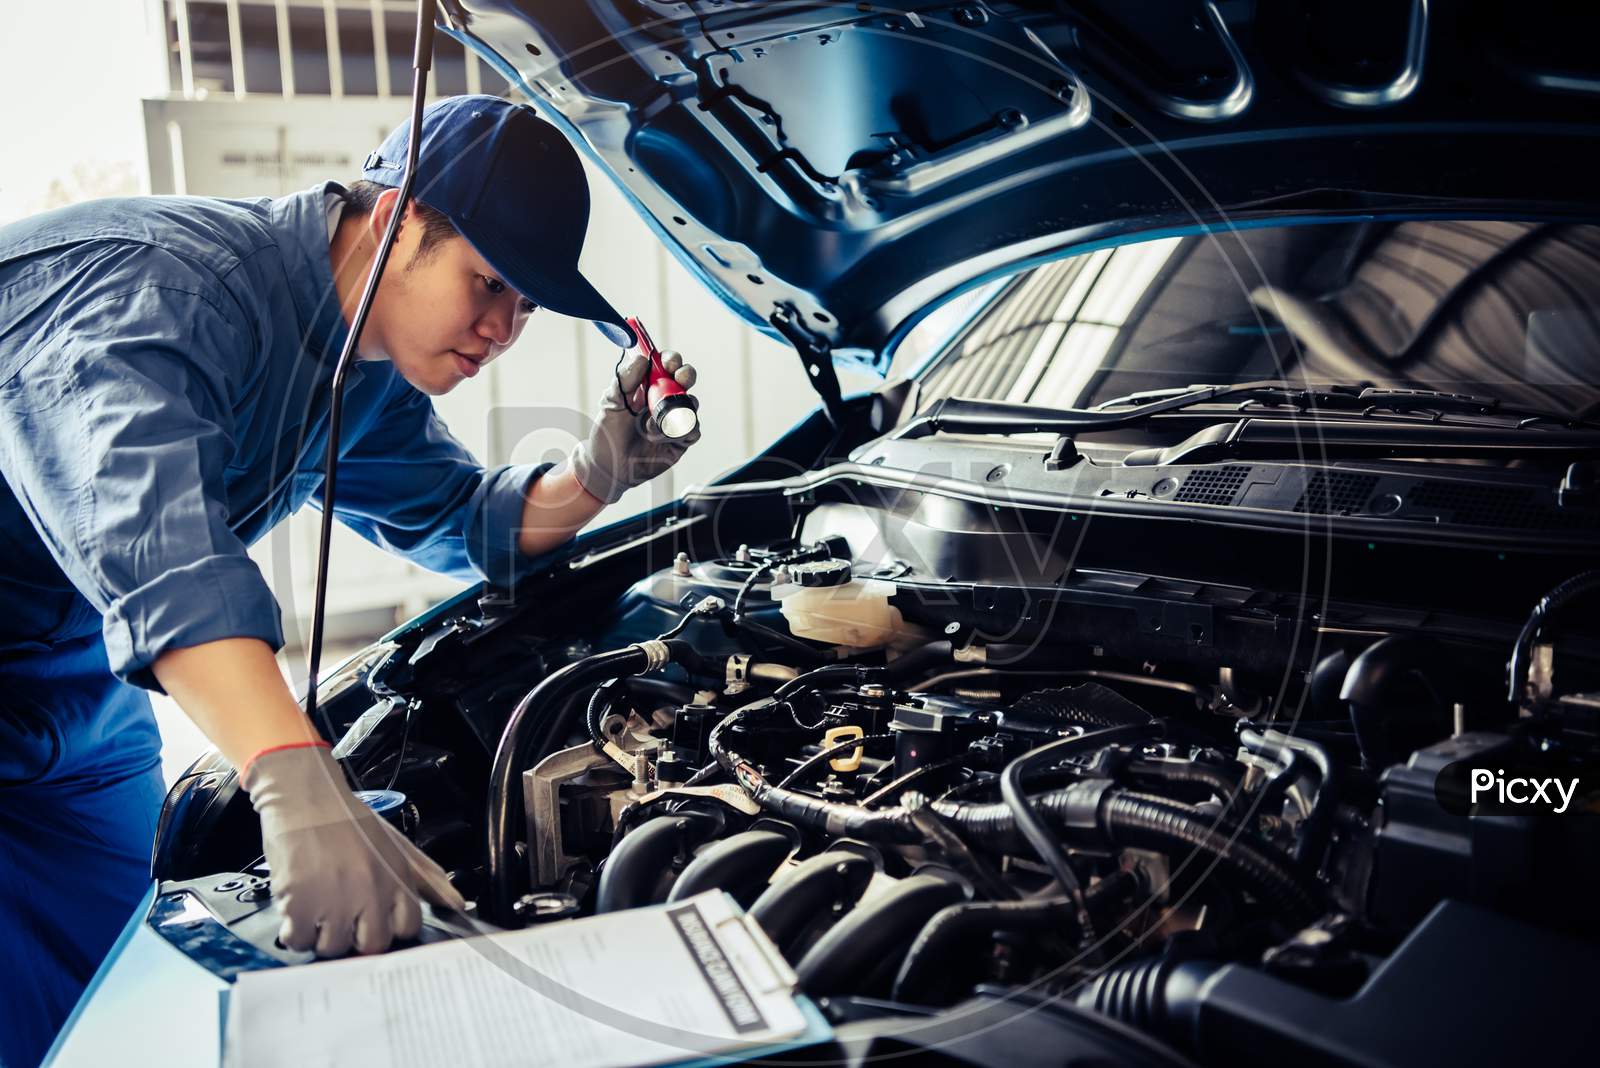 Car Mechanic Technician Holding Flashlight Checking Engine With Checklist Clipboard To Maintenance Vehicle By Customer Claim Order In Auto Repair Shop Garage Repair Service. People Occupation Business